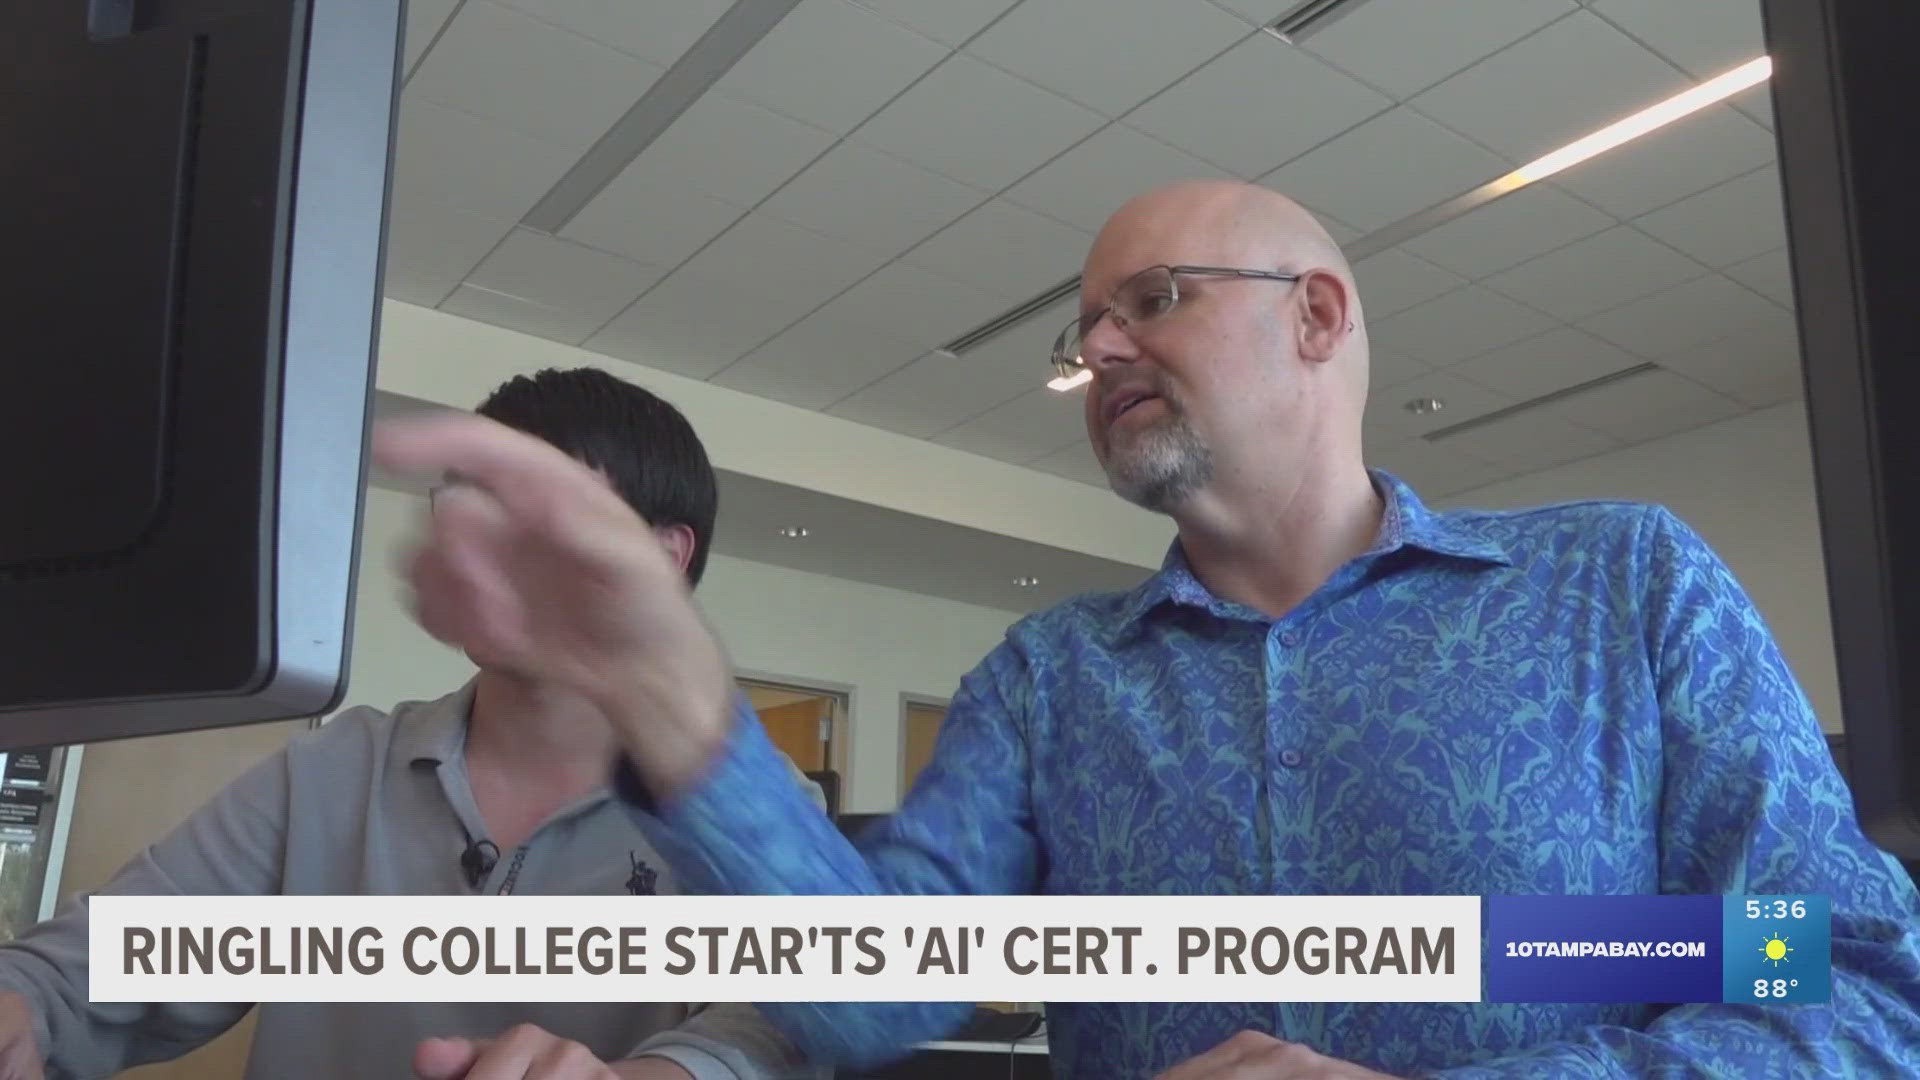 Schools like Ringling College are starting to train students on artificial intelligence, the latest technology that has been raising concerns across many industries.